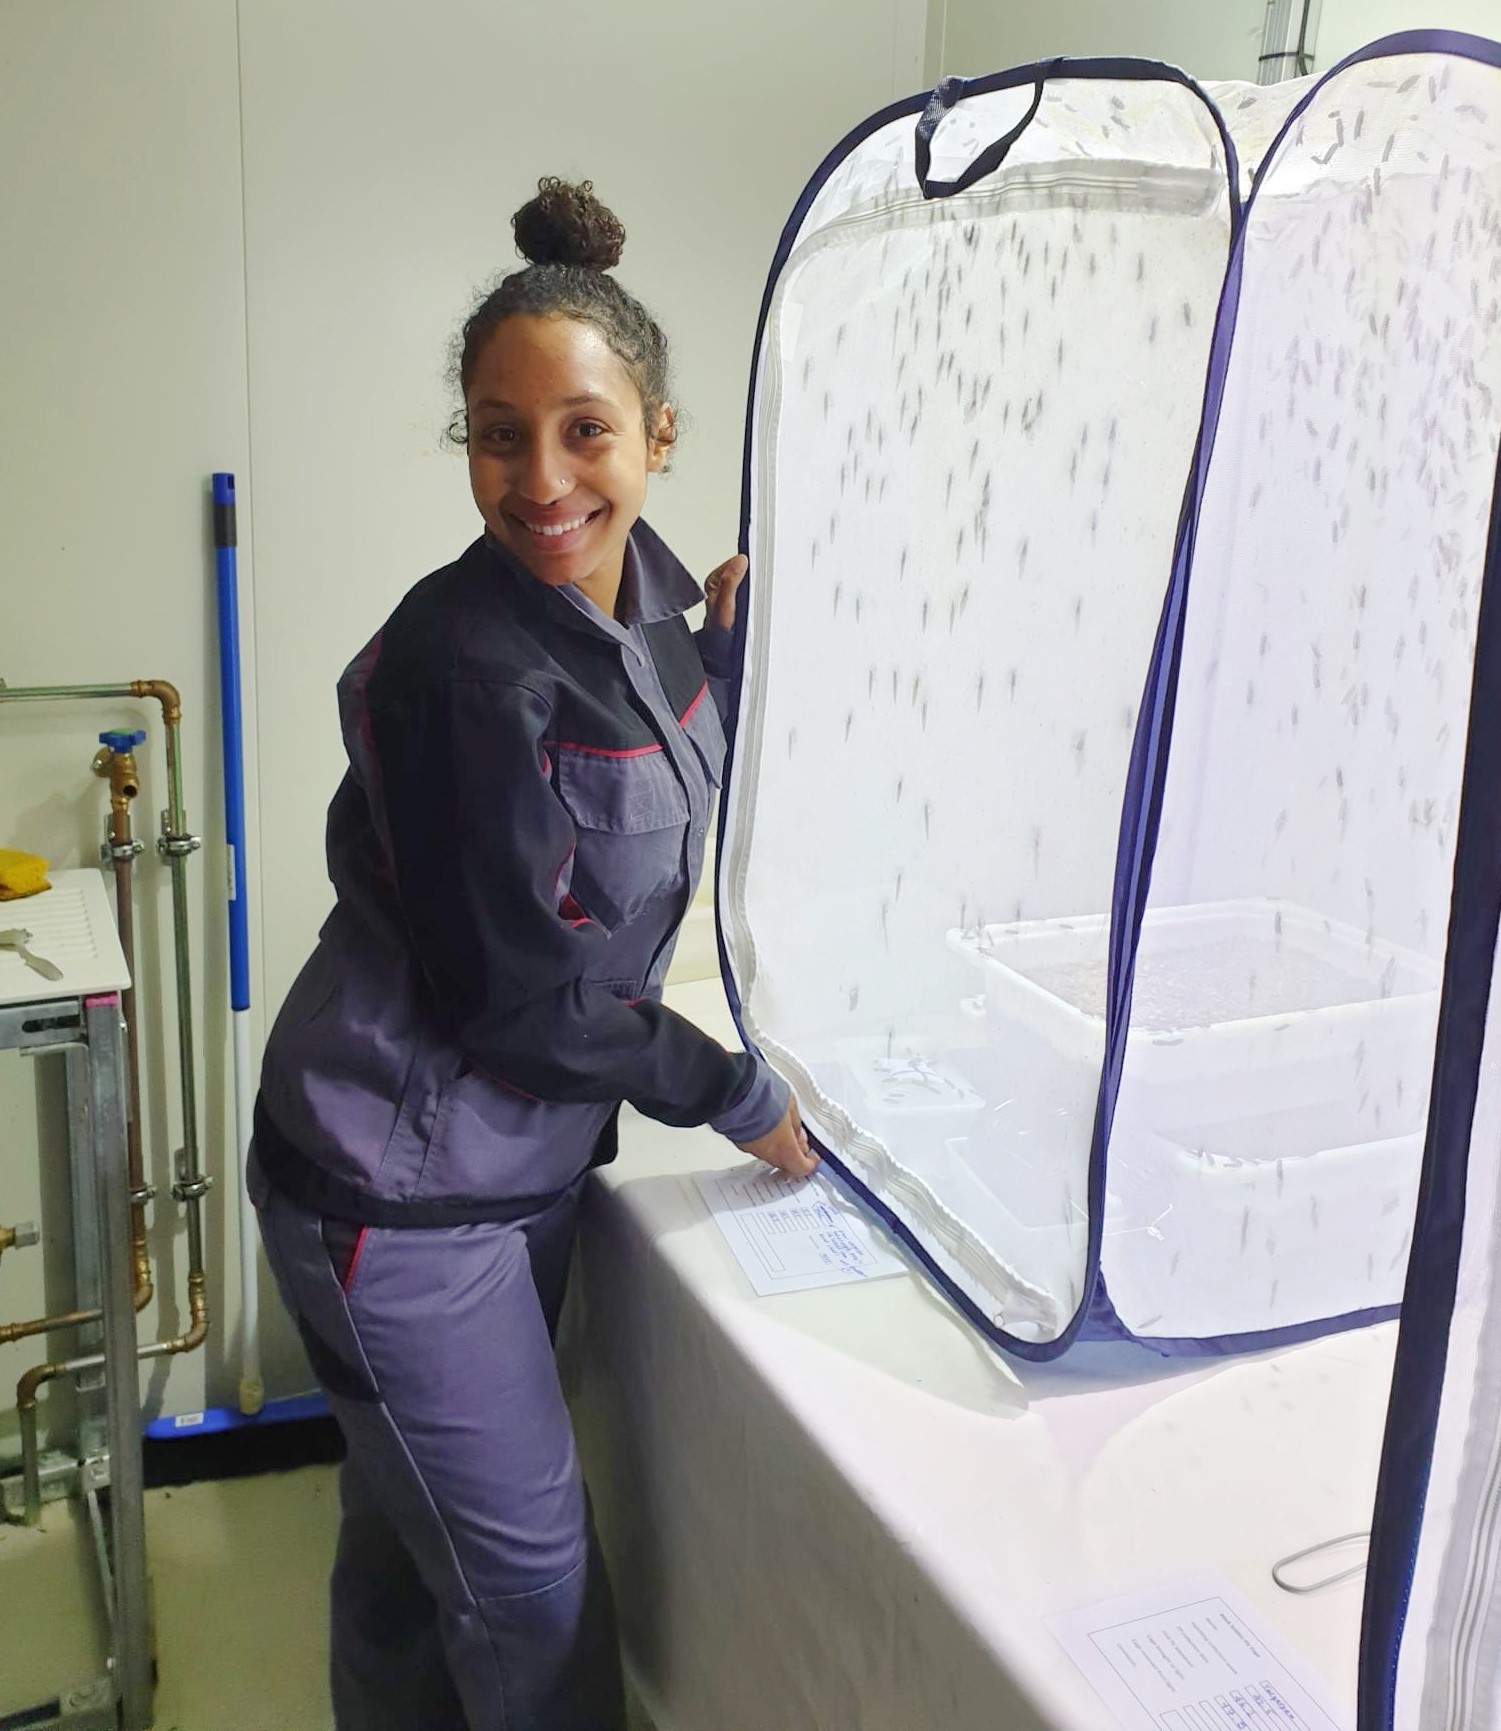 Daniela Peguero working with the black soldier fly “love cages” at the joined research facility at Eawag, Dübendorf. (Photograph: Daniela Peguero)